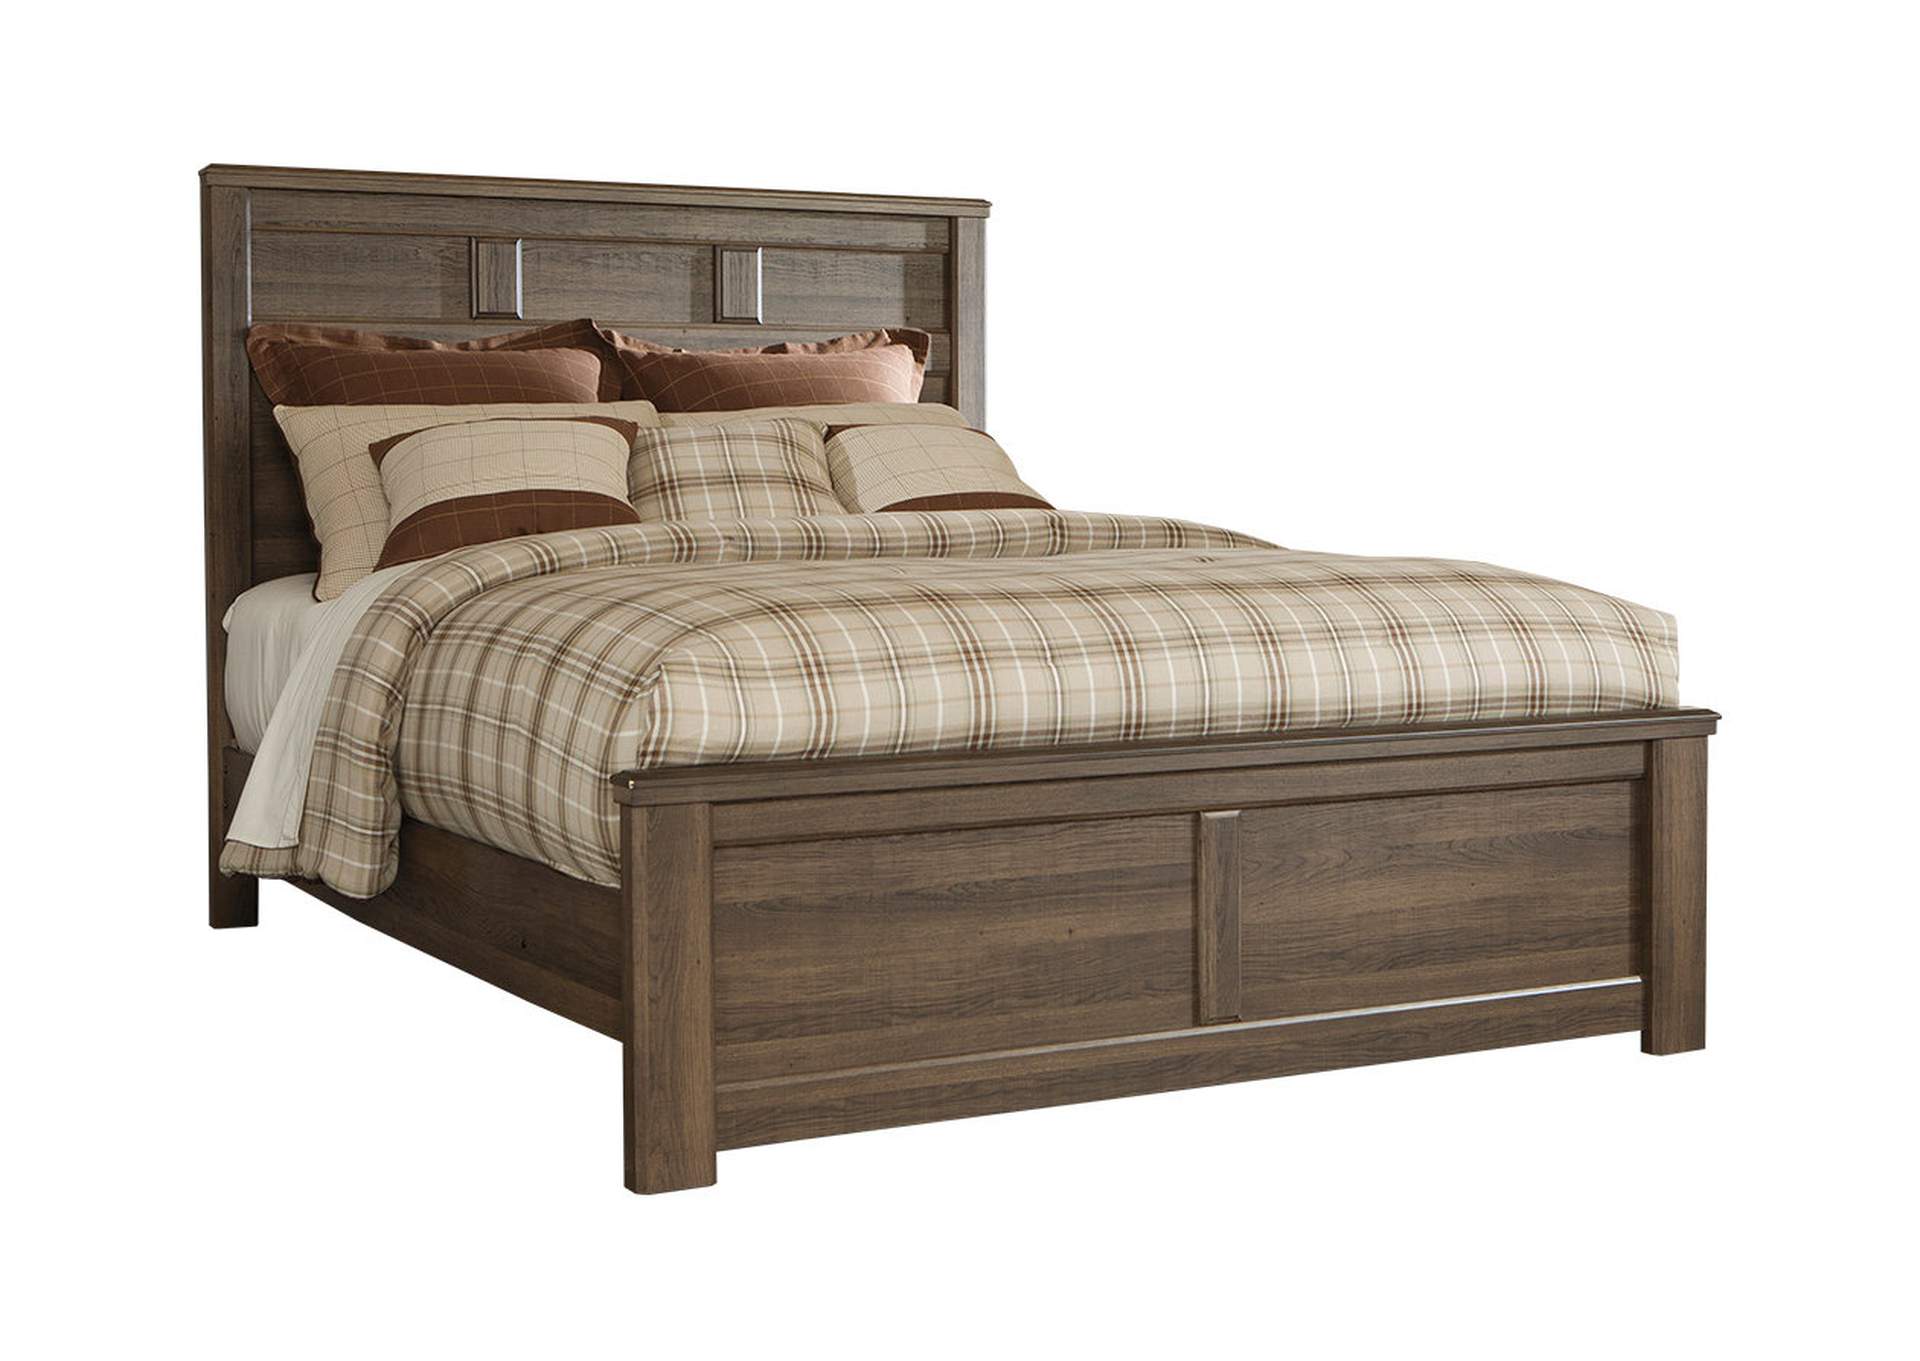 Juararo Queen Panel Bed with Mirrored Dresser, Chest and 2 Nightstands,Signature Design By Ashley